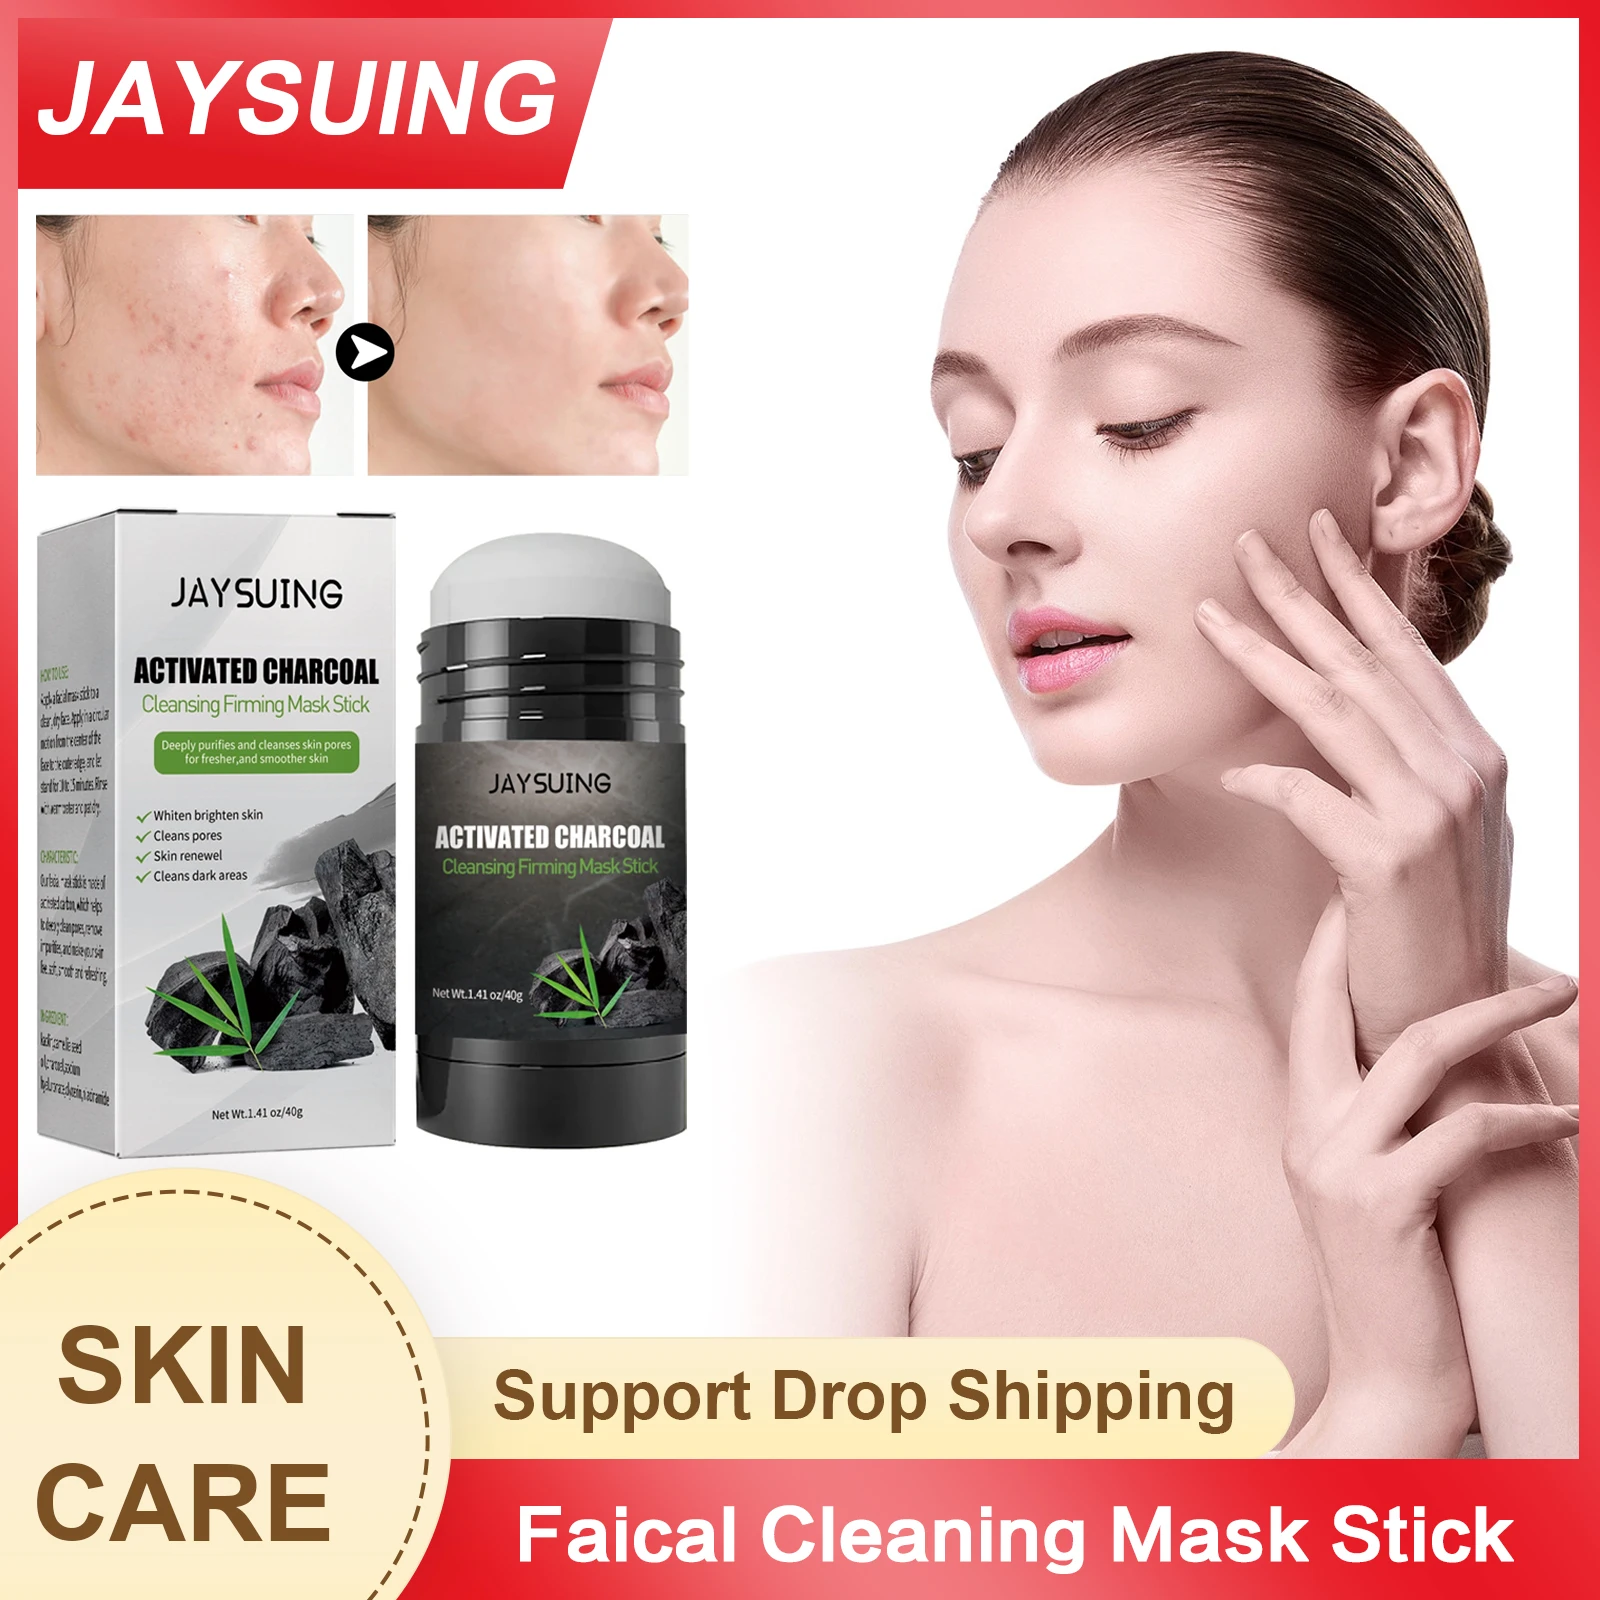 Anti Acne Mask Shrink Pores Blackheads Pimple Remover Oil Control Black Dots Spots Treatment Whitening Purifying Face Clean Mask blackhead remover nose masks black dots nose strip oil control clean pores smooth delicate skin care moisturizer whitening 30g